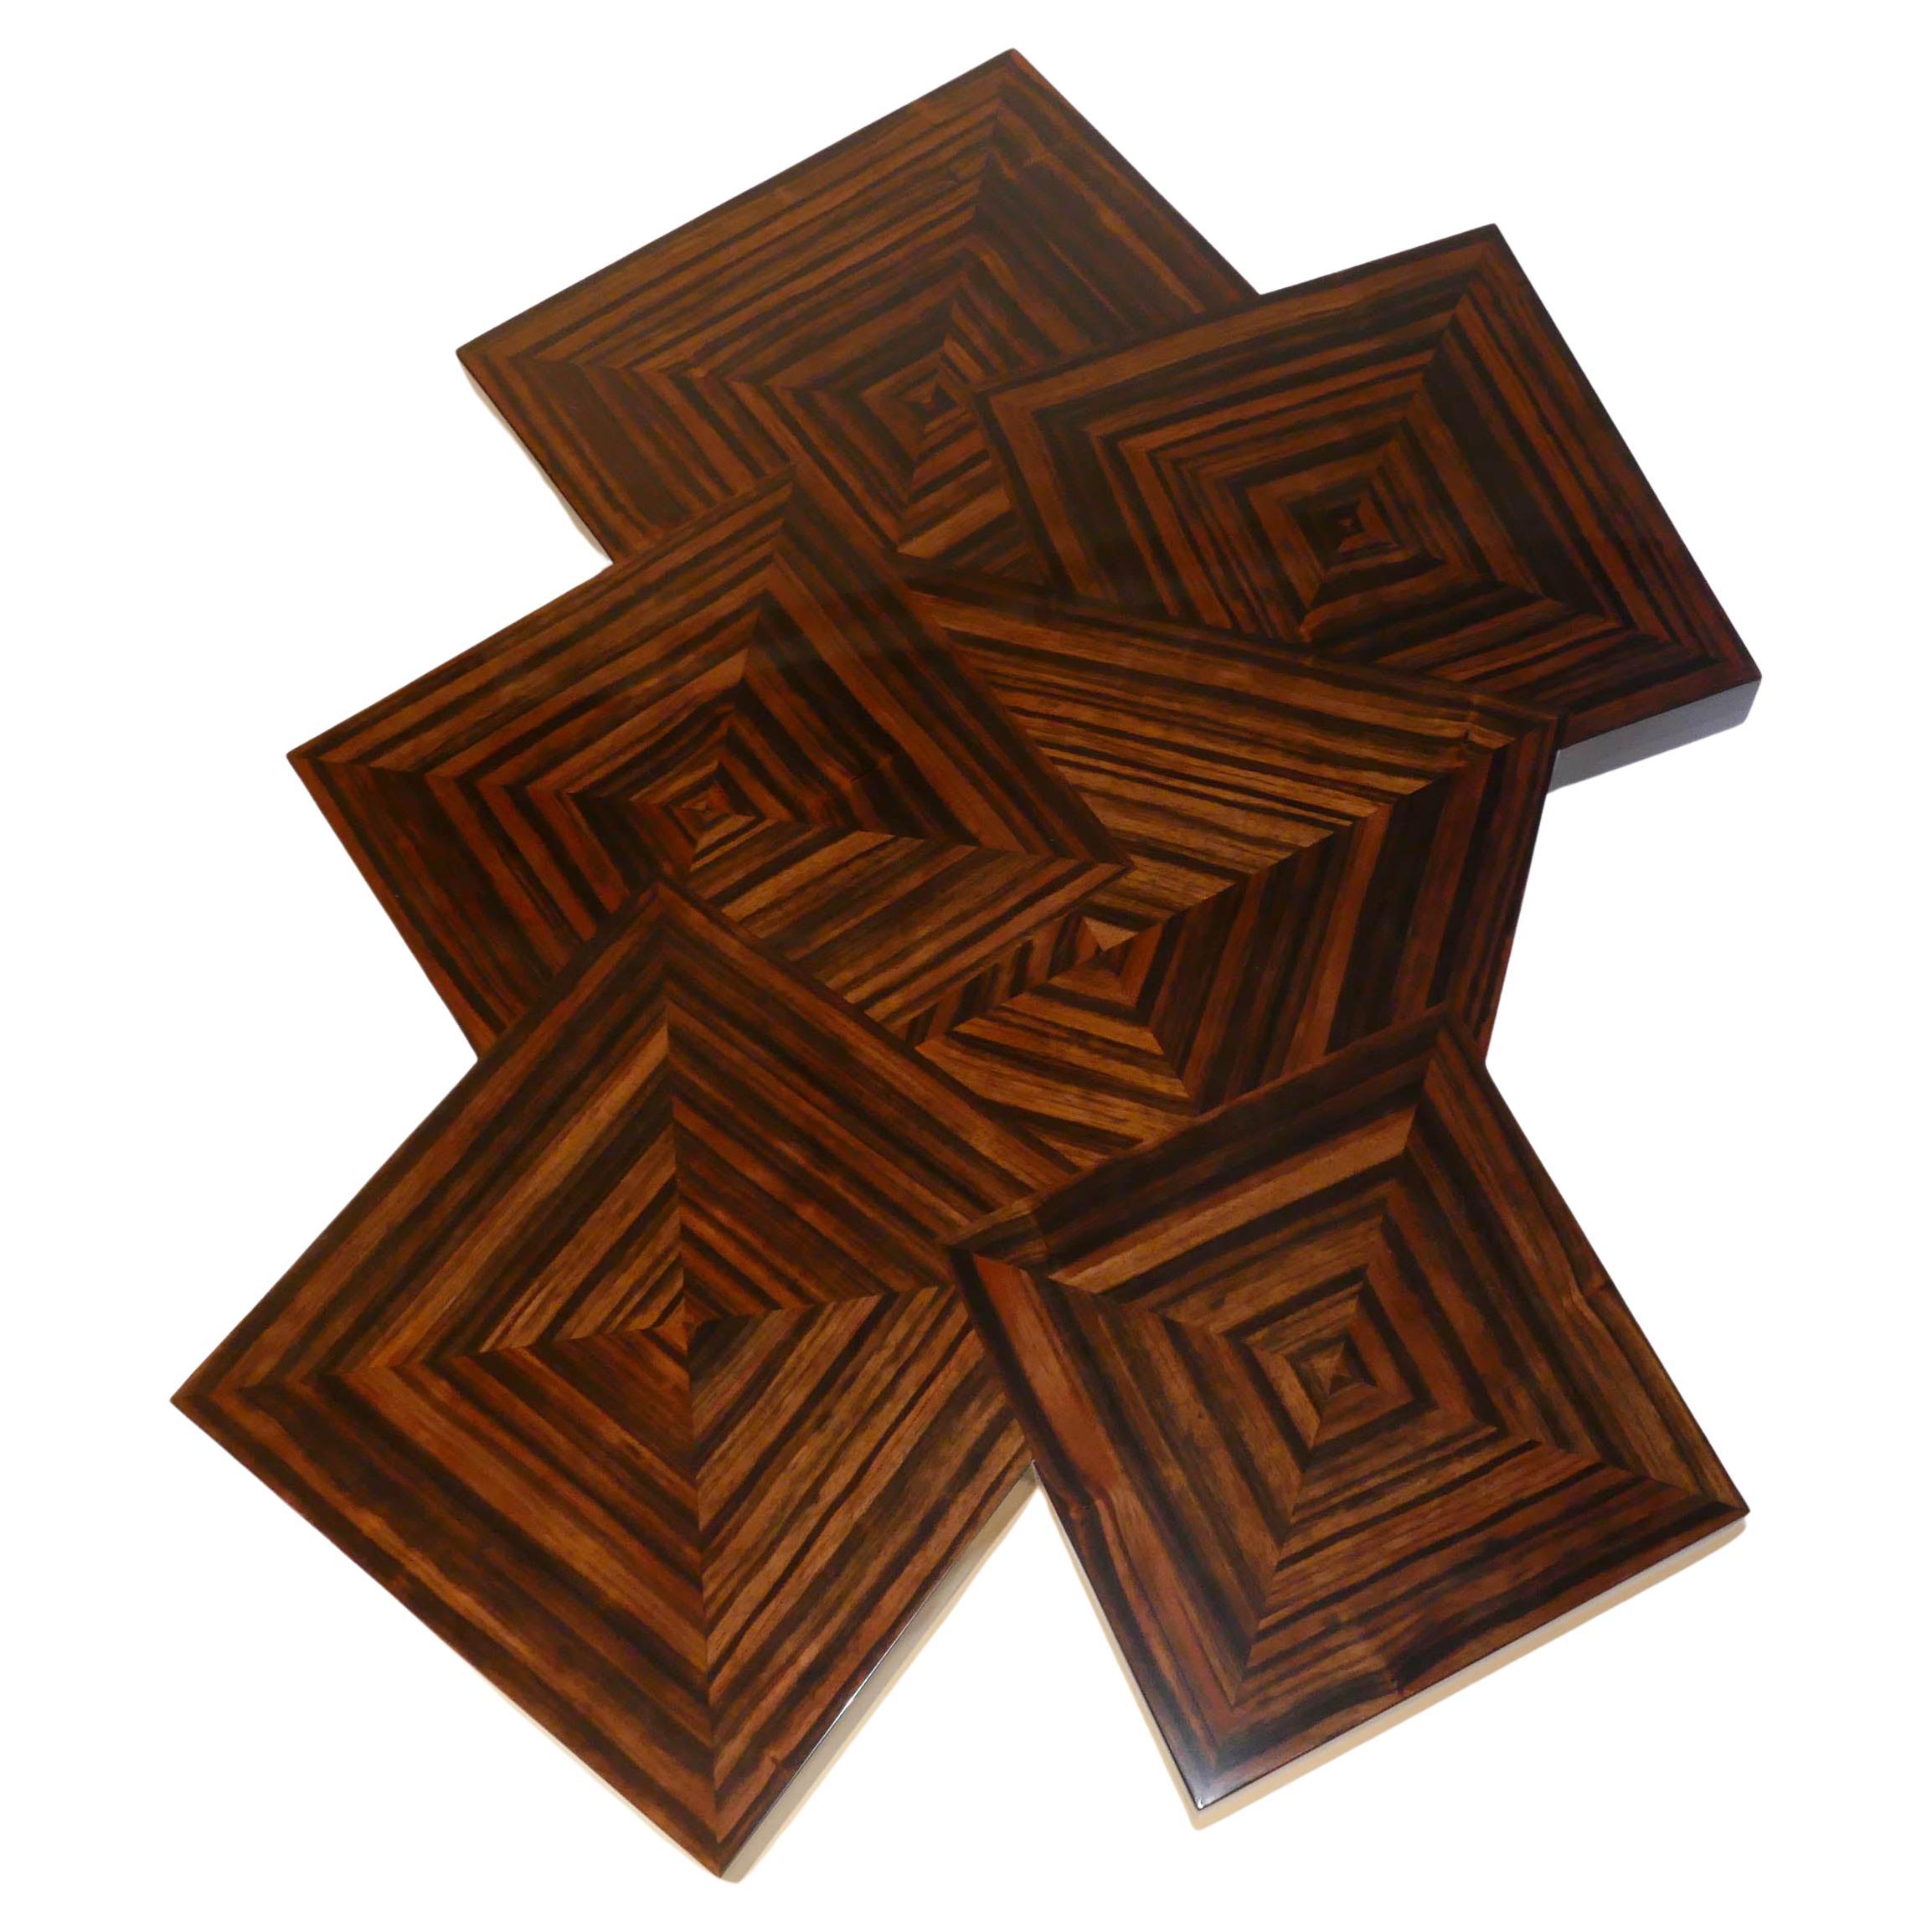 Coffee Table "Cubes" in Macassar Ebony Wood Marquetery by Aymeric Lefort